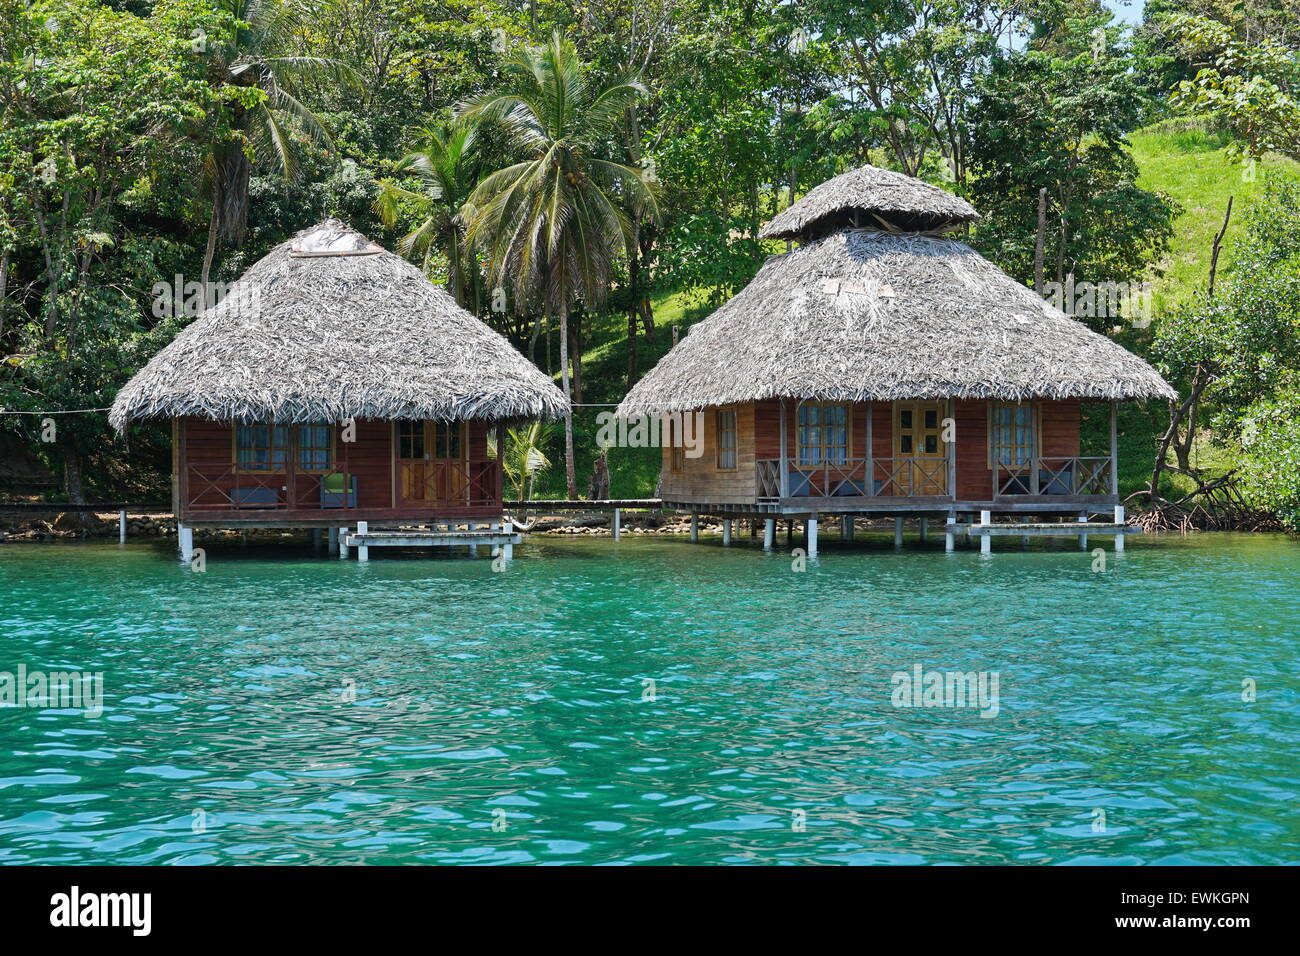 Tropical wooden bungalows with thatched roof over the water, Caribbean sea, Bocas del Toro, Central America, Panama Stock Photo